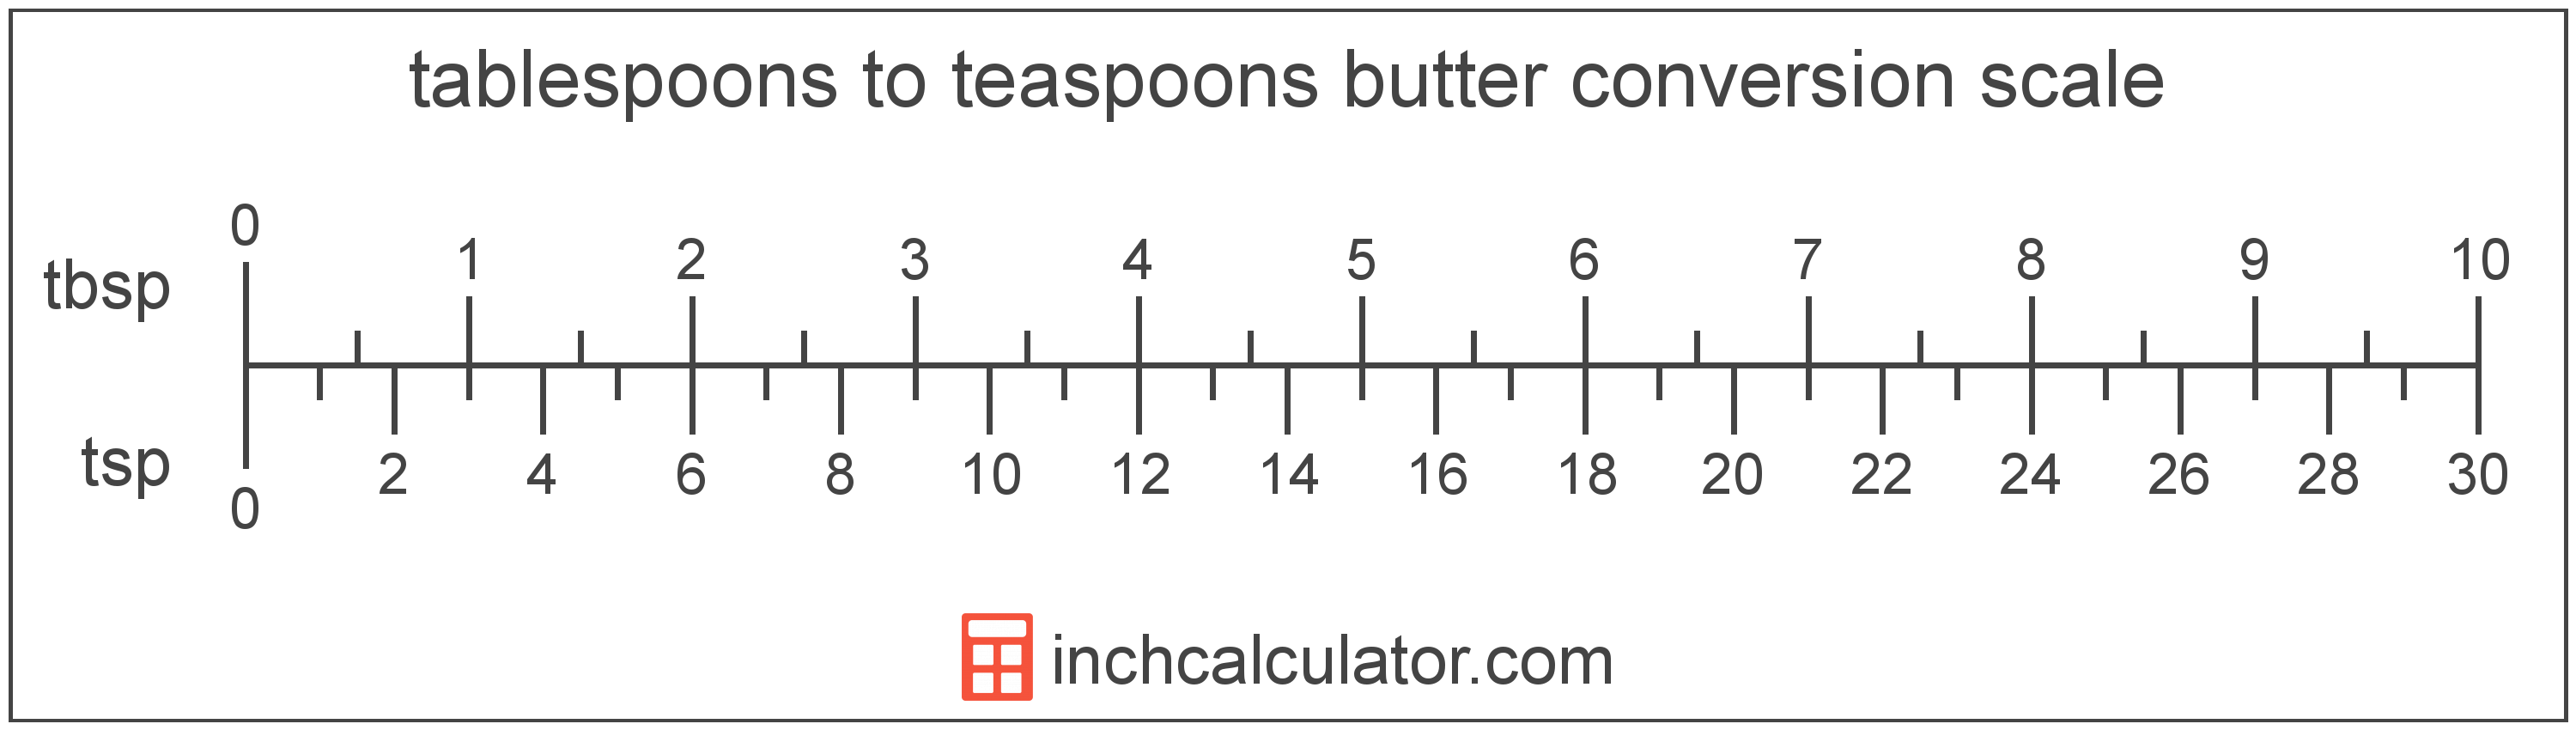 conversion scale showing teaspoons and equivalent tablespoons butter values